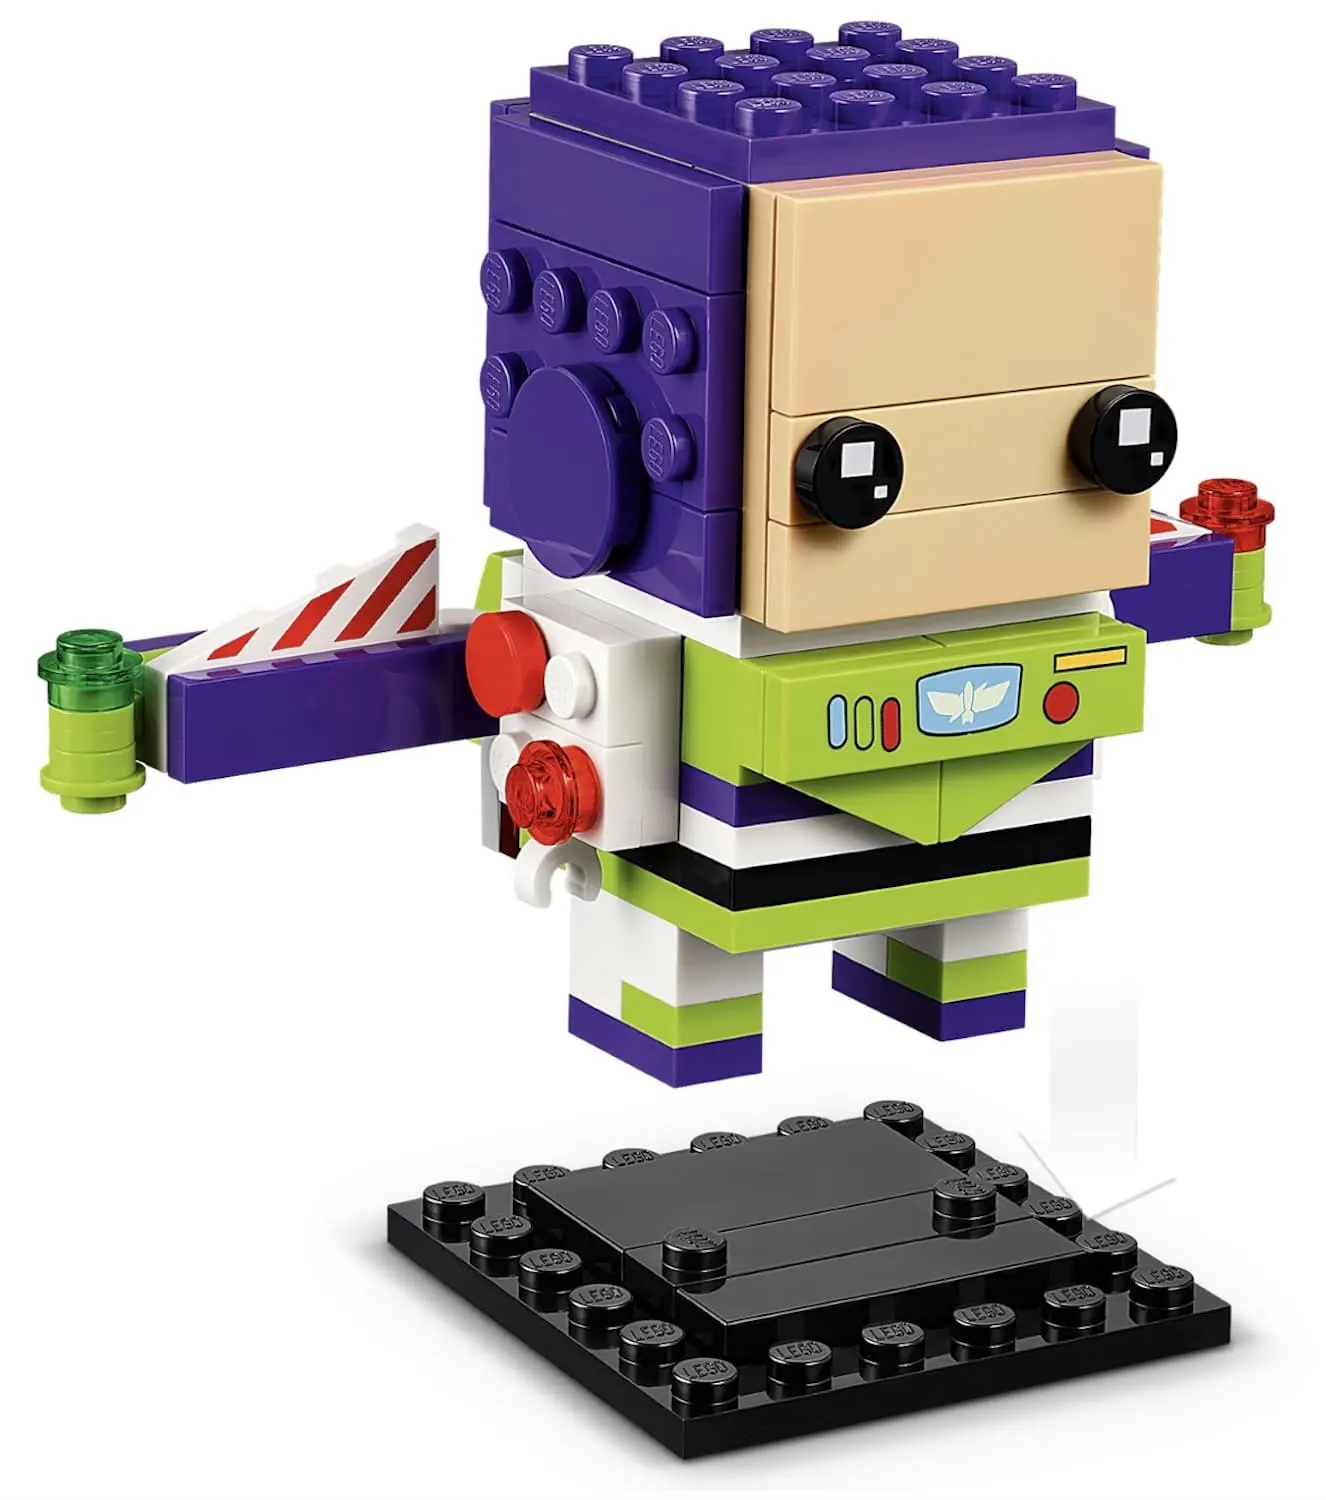 LEGO Brickheadz 40552 Buzz Lightyear New Sets 2022 Revealed | Woody and Boo Peep also will be Released